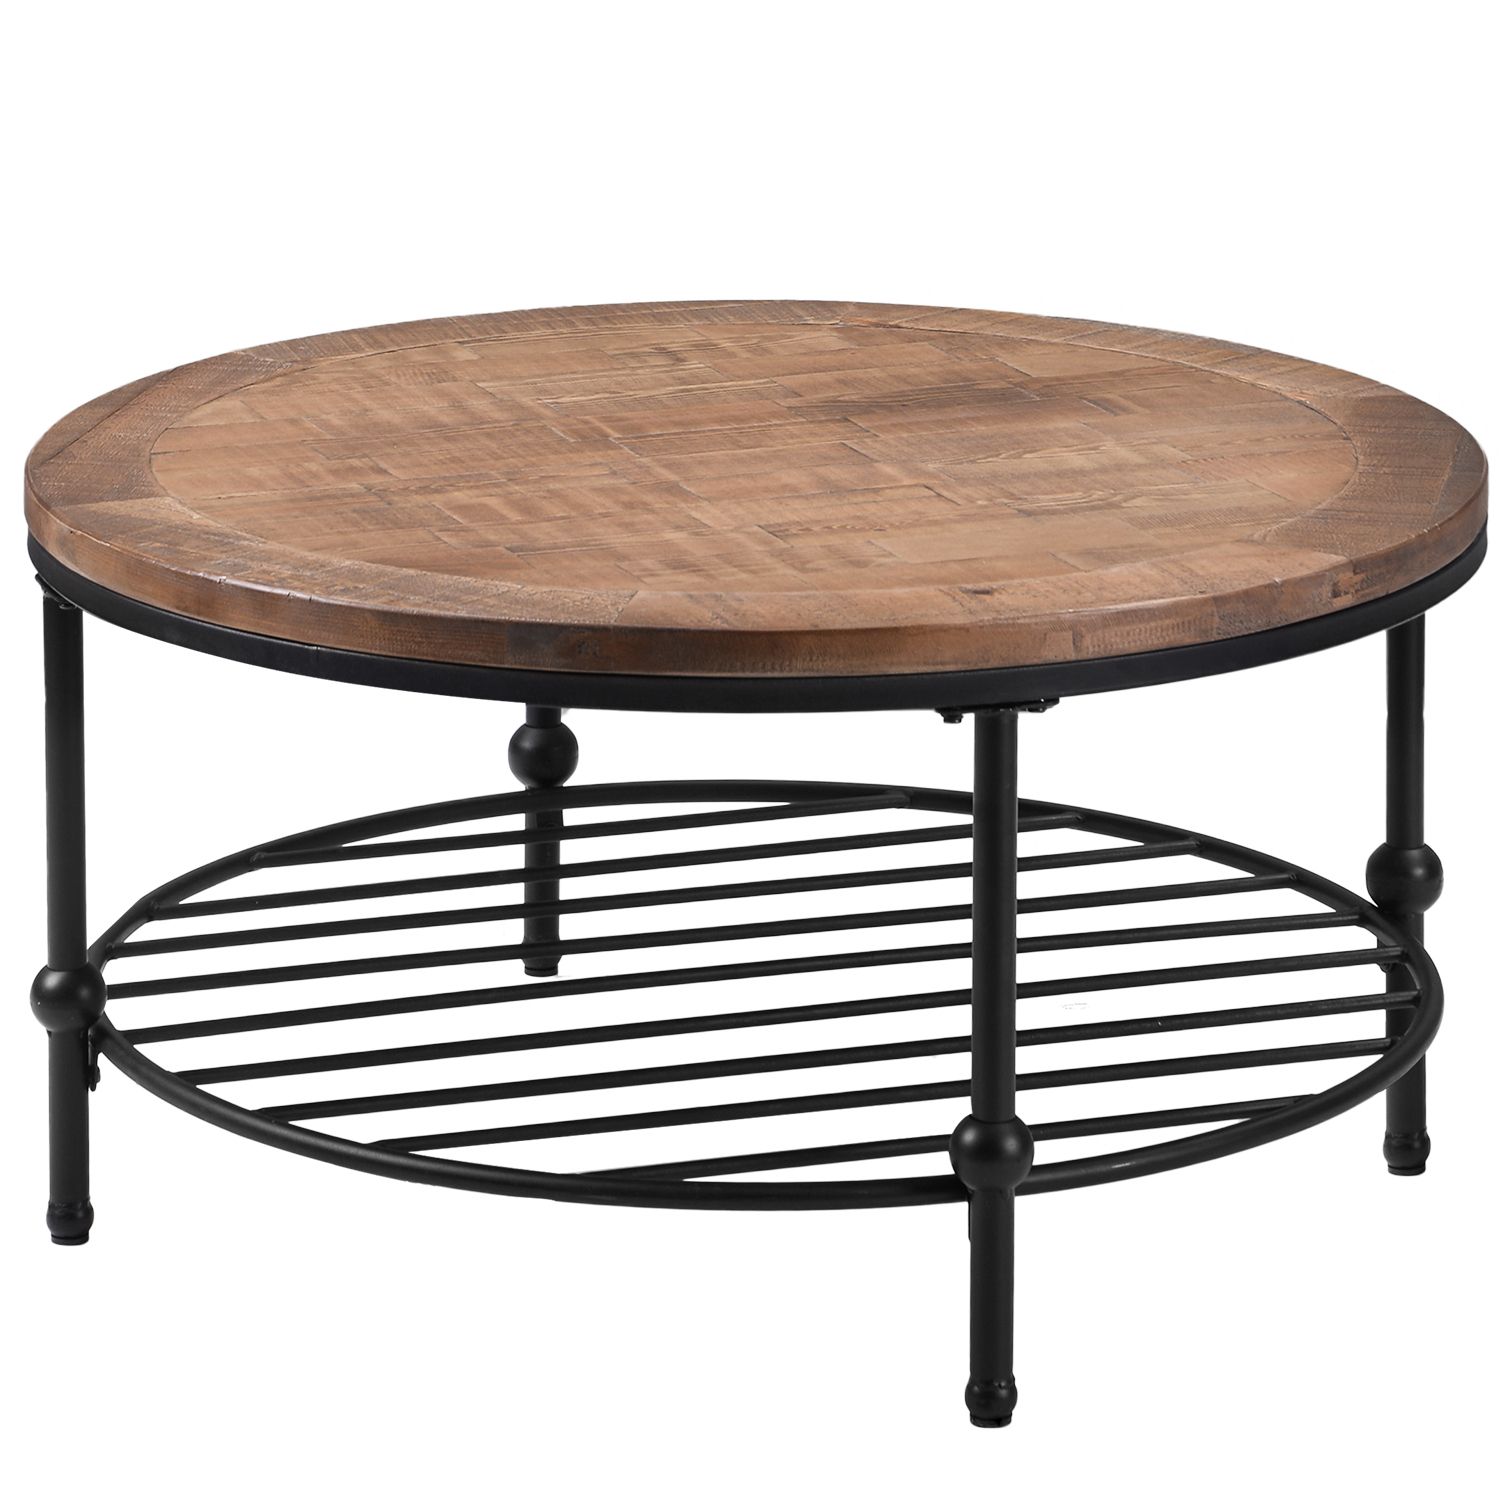 Rustic Natural Round Coffee Table With Storage Shelf For Living Room, Easy  Assembly (round) – Walmart With 2020 Rustic Round Coffee Tables (View 17 of 20)